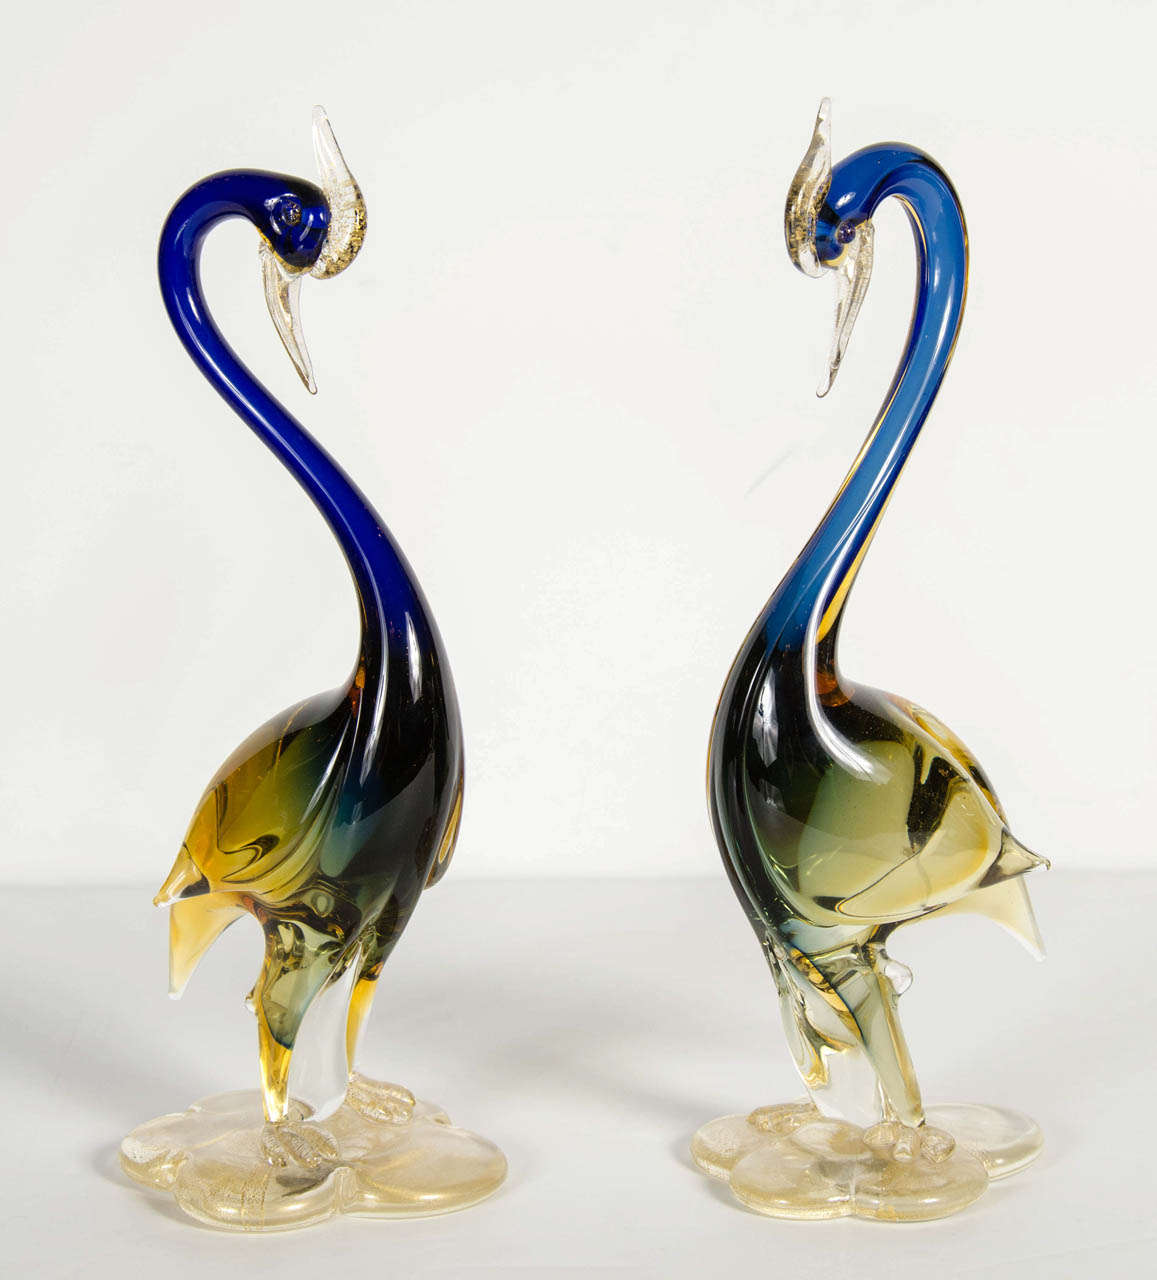 These gorgeous hand blown Murano glass cranes feature a sapphire blue body with amber accents on a base with flecks of 24k yellow gold in clear glass.Stunning accent pieces.